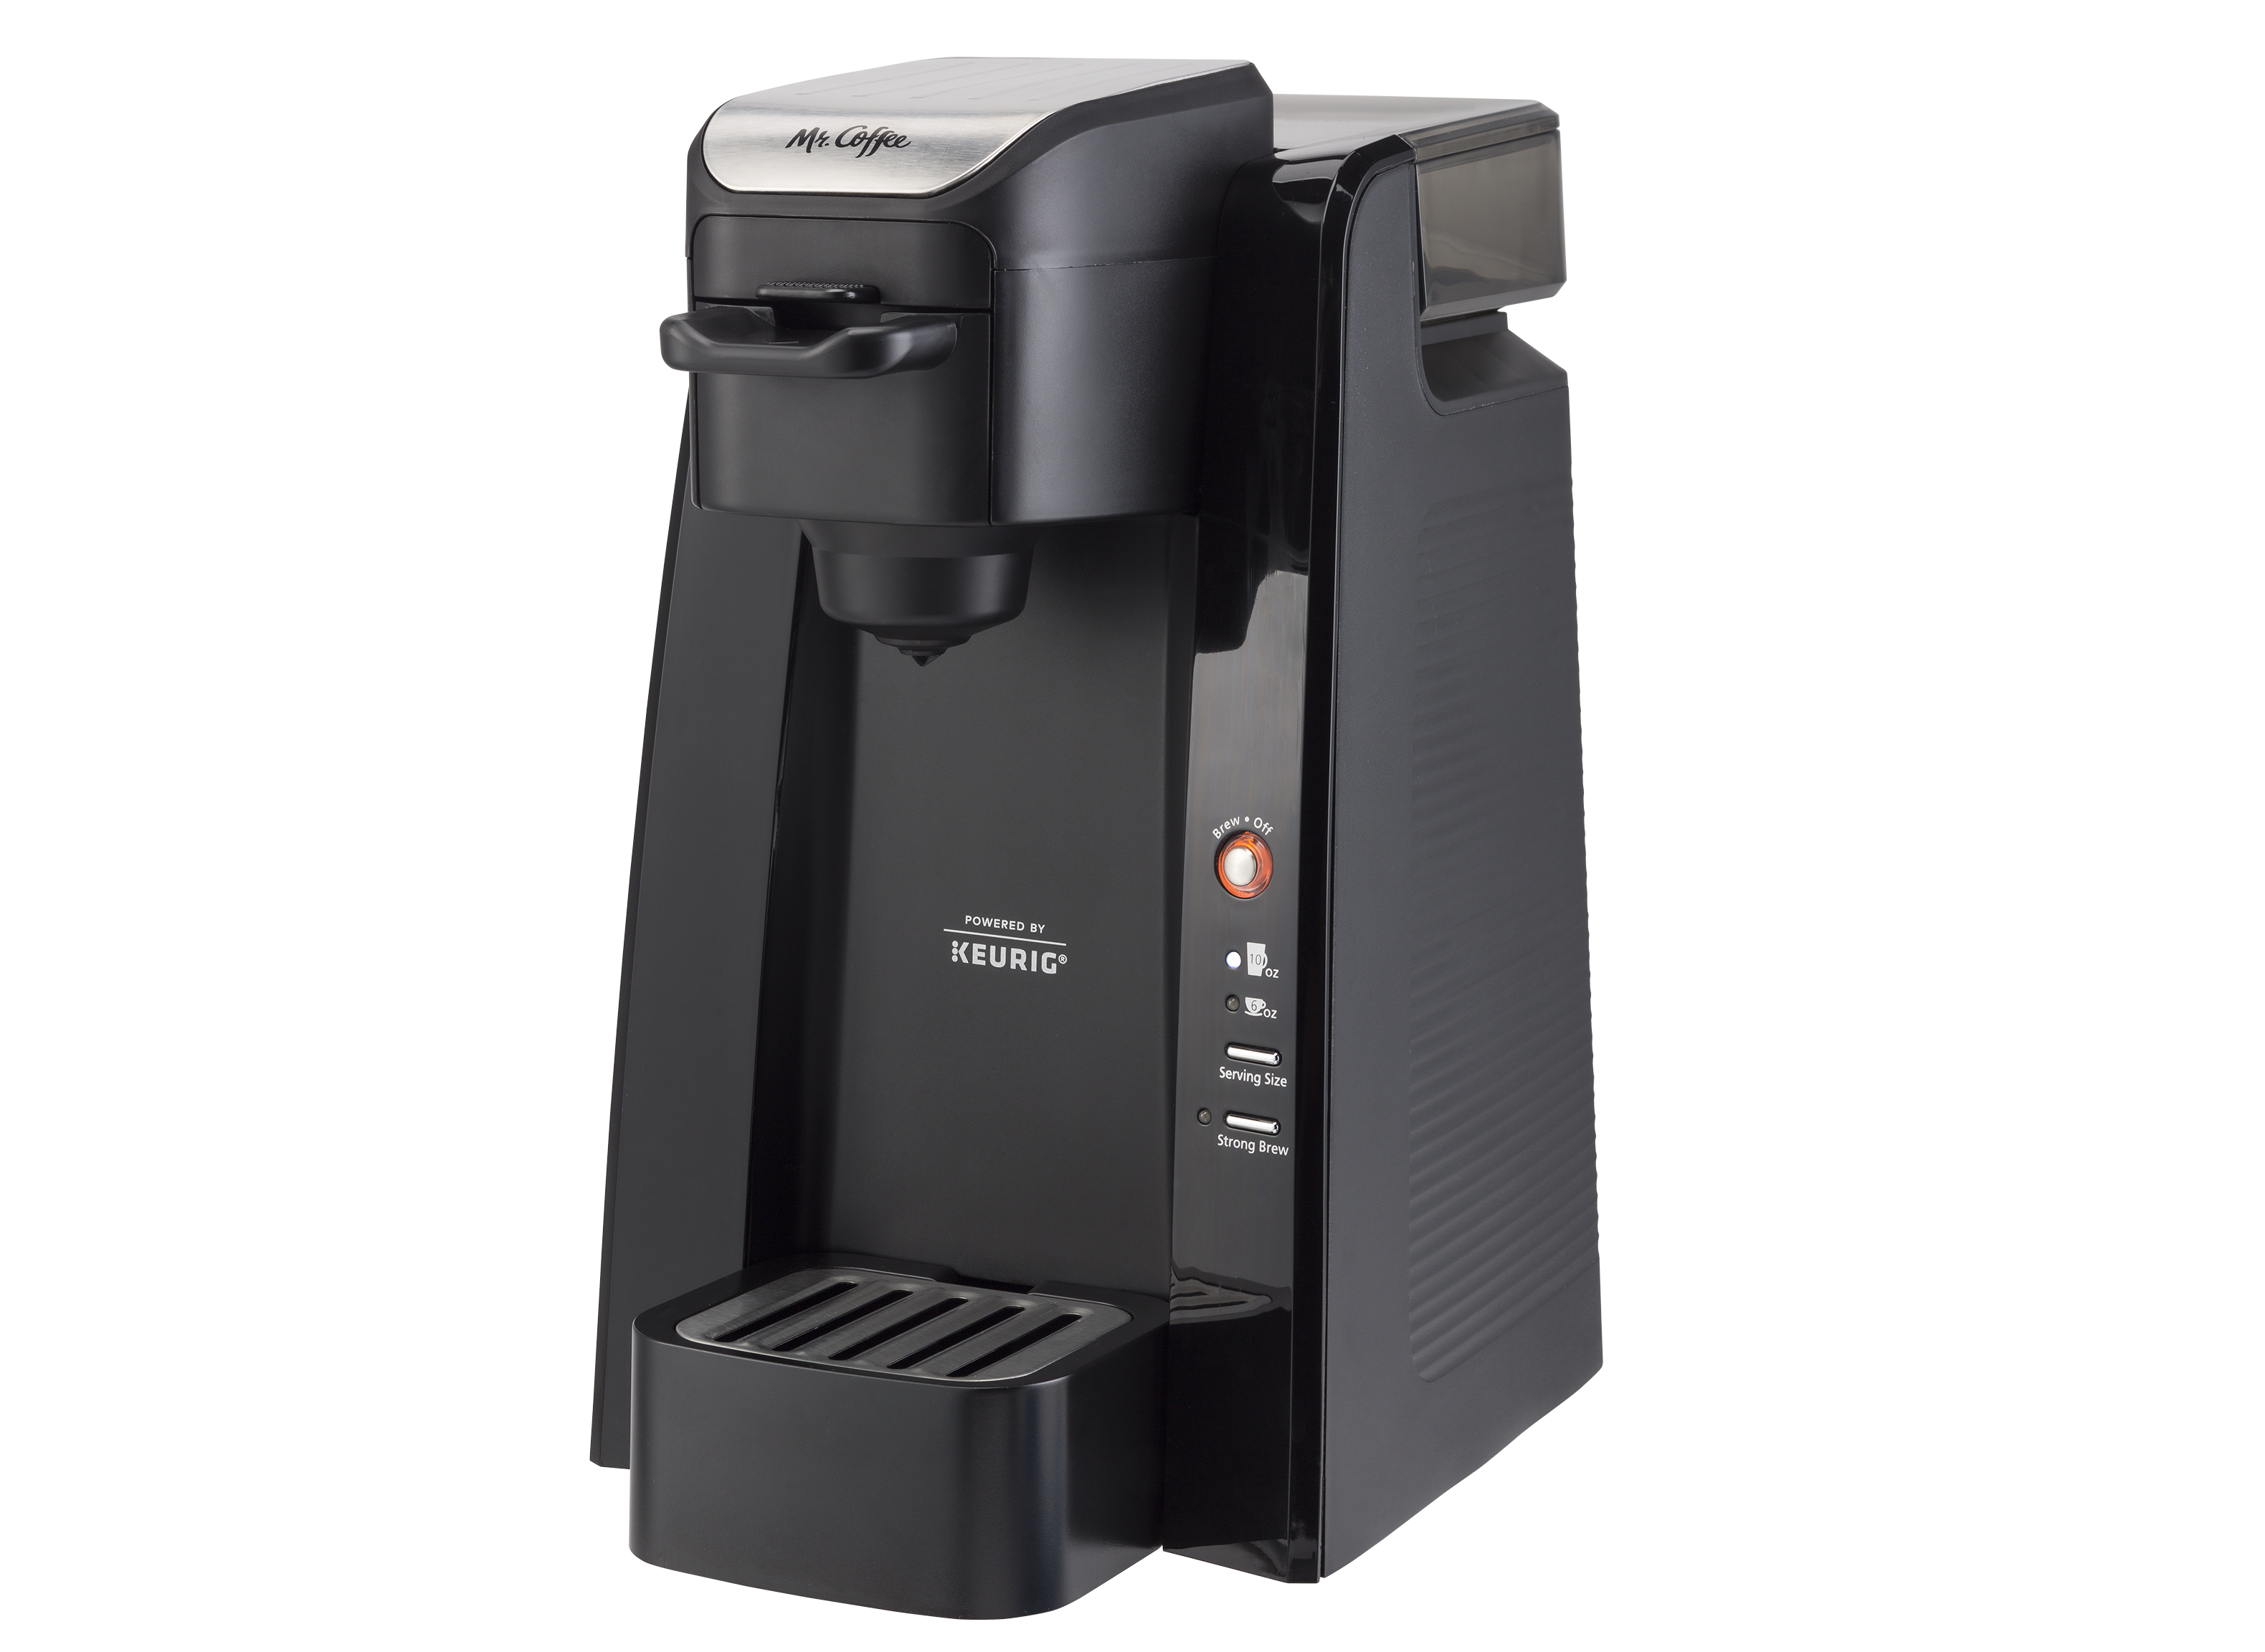 https://crdms.images.consumerreports.org/prod/products/cr/models/388222-singleservecoffeemakers-mrcoffee-singlecupbrewingsystembvmcsc5001.png